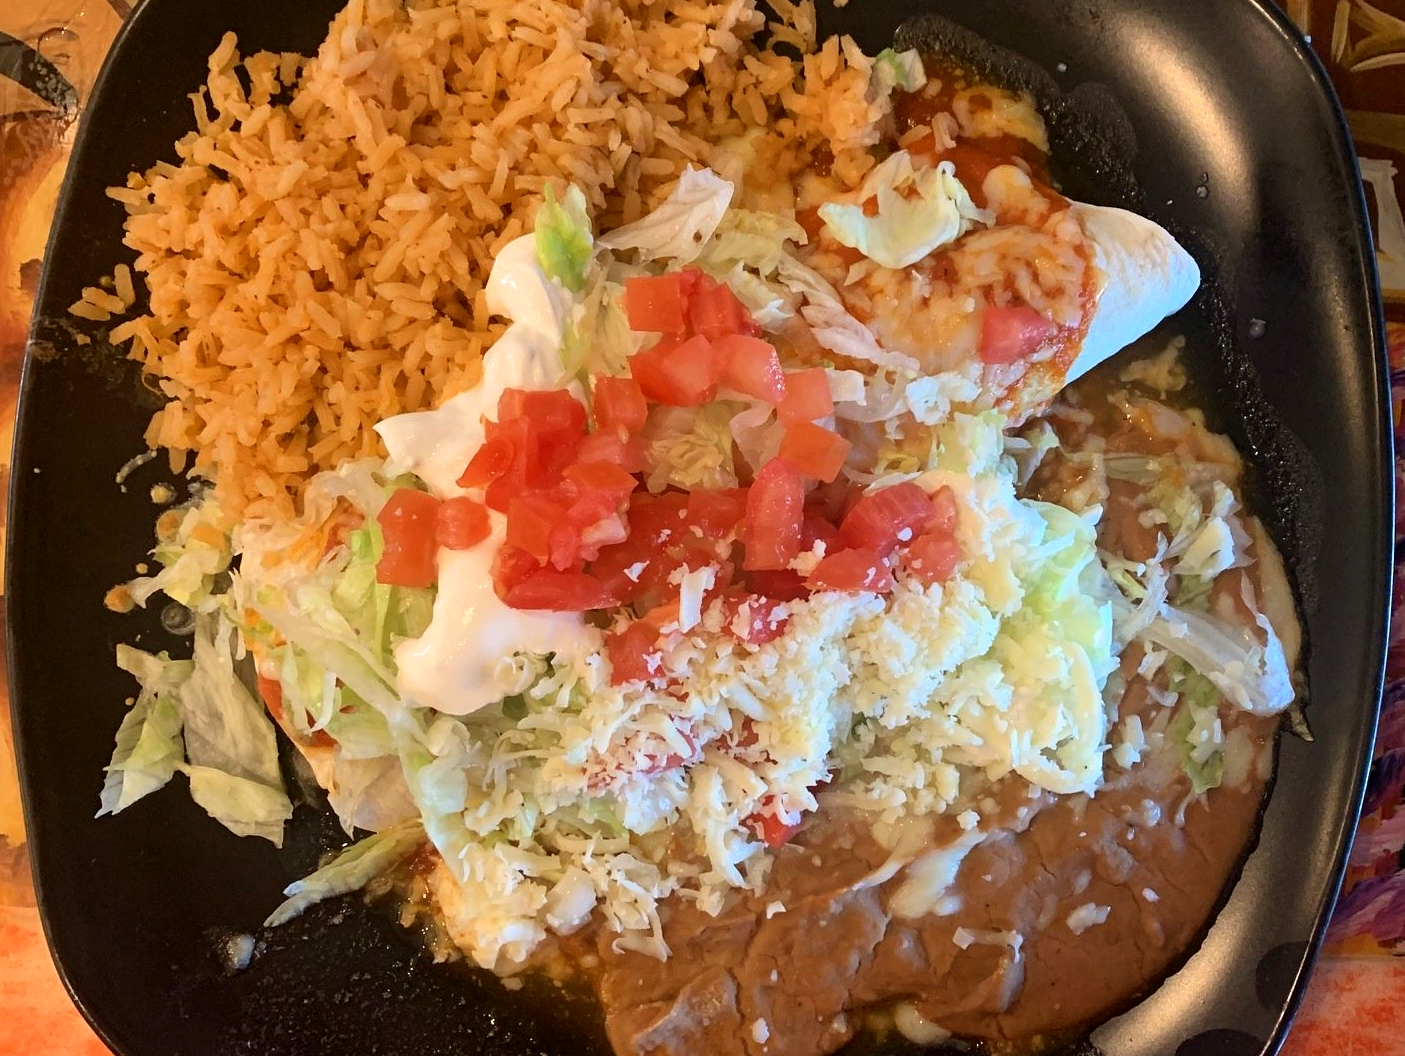 A close up of a plate of food with rice and beans on a table.